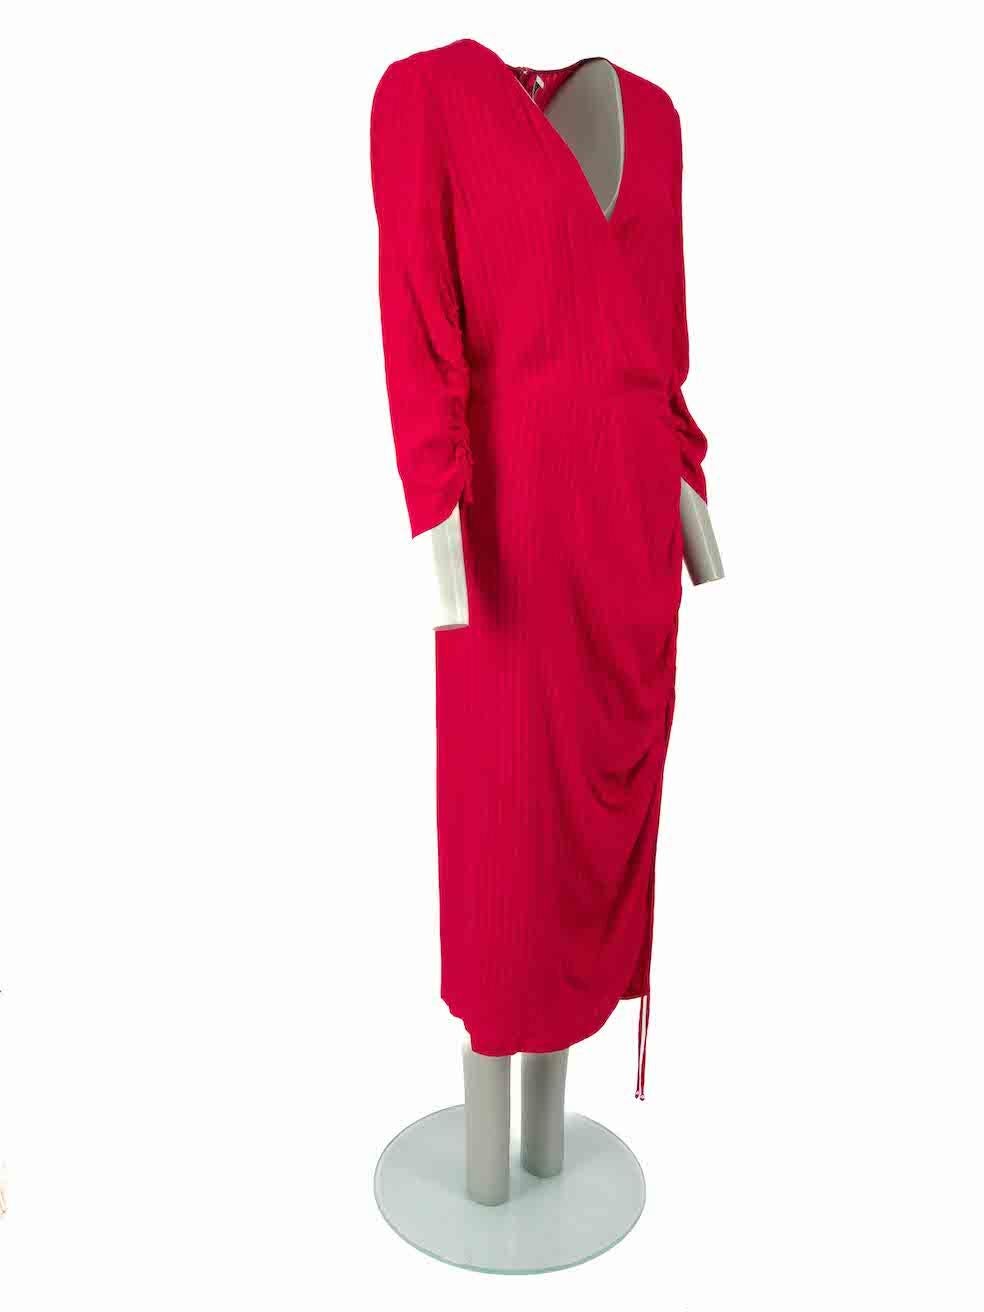 CONDITION is Very good. Minimal wear to dress is evident. Minimal pull in fabric to back of dress on this used Altuzarra designer resale item. Please note that the brand label is partly detached.
 
 Details 
 Hot pink
 Viscose
 Dress
 Ruched detail
